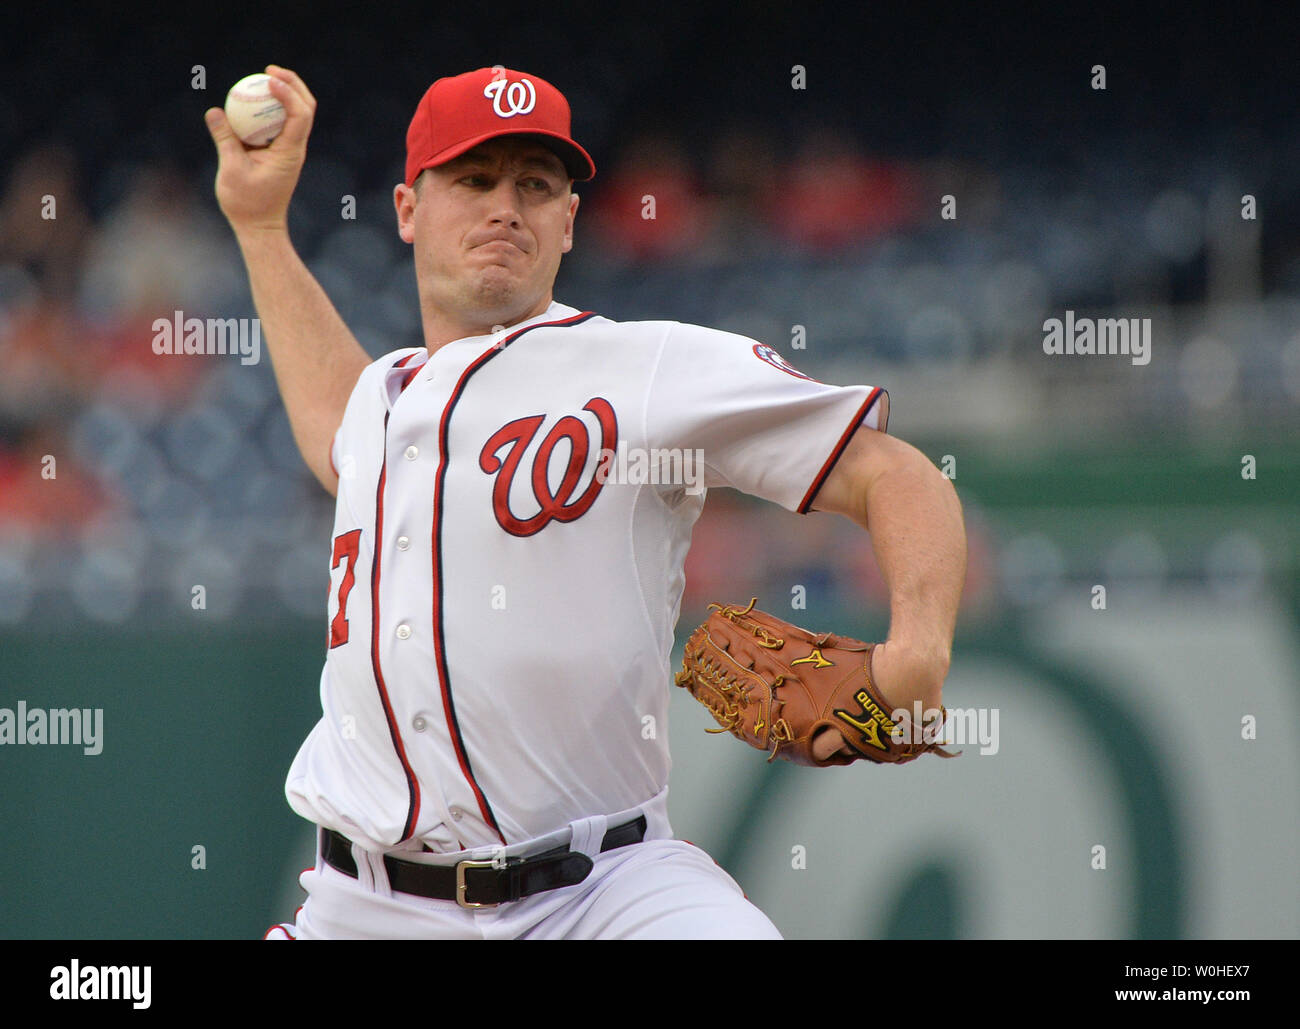 Washington Nationals Jordan Zimmermann pitches against the Miami Marlins in the first inning at Nationals Park in Washington, D.C. May 28, 2014.  UPI/Kevin Dietsch Stock Photo